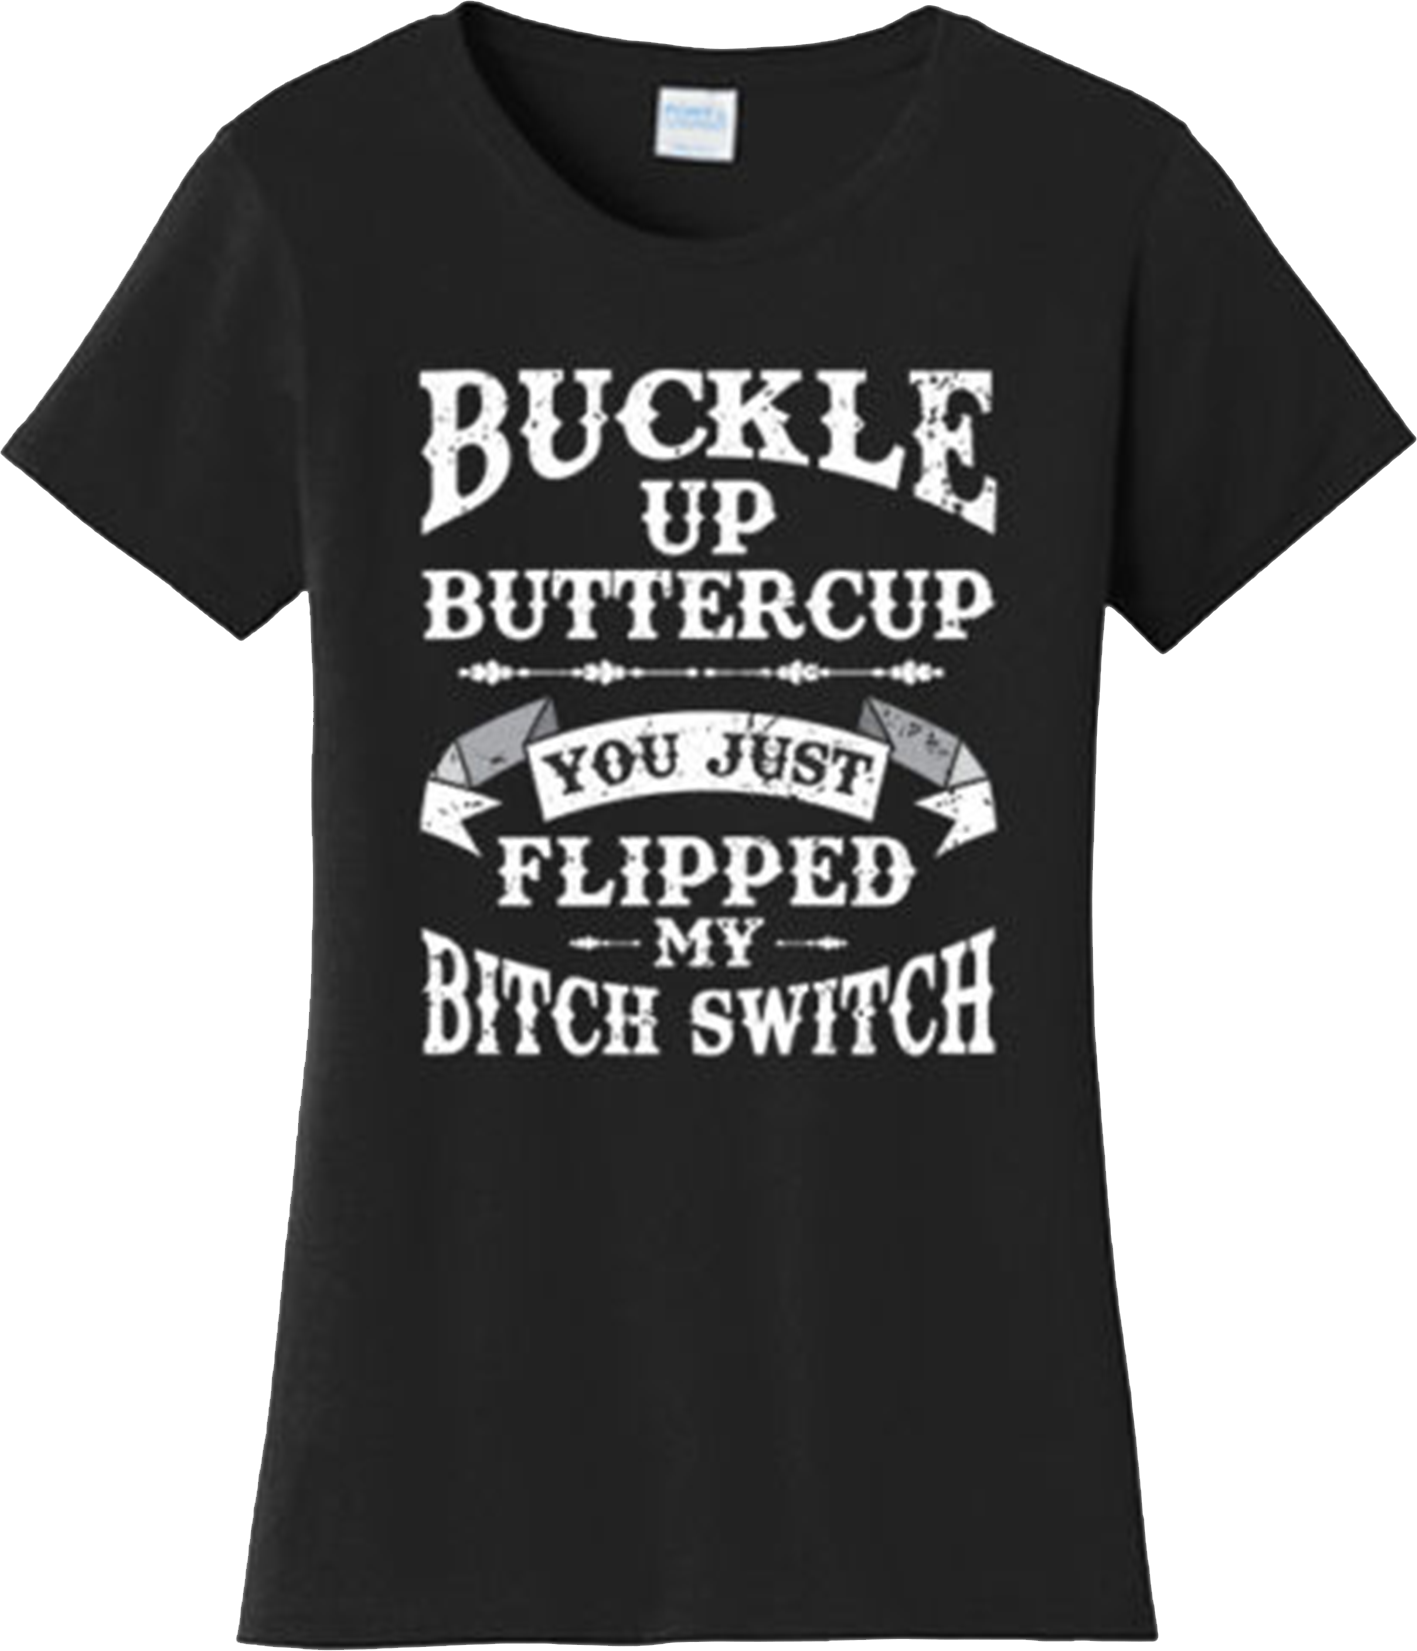 Funny Bitch Switch Sarcastic Rude College Humor Party Gift T Shirt Graphic Tee